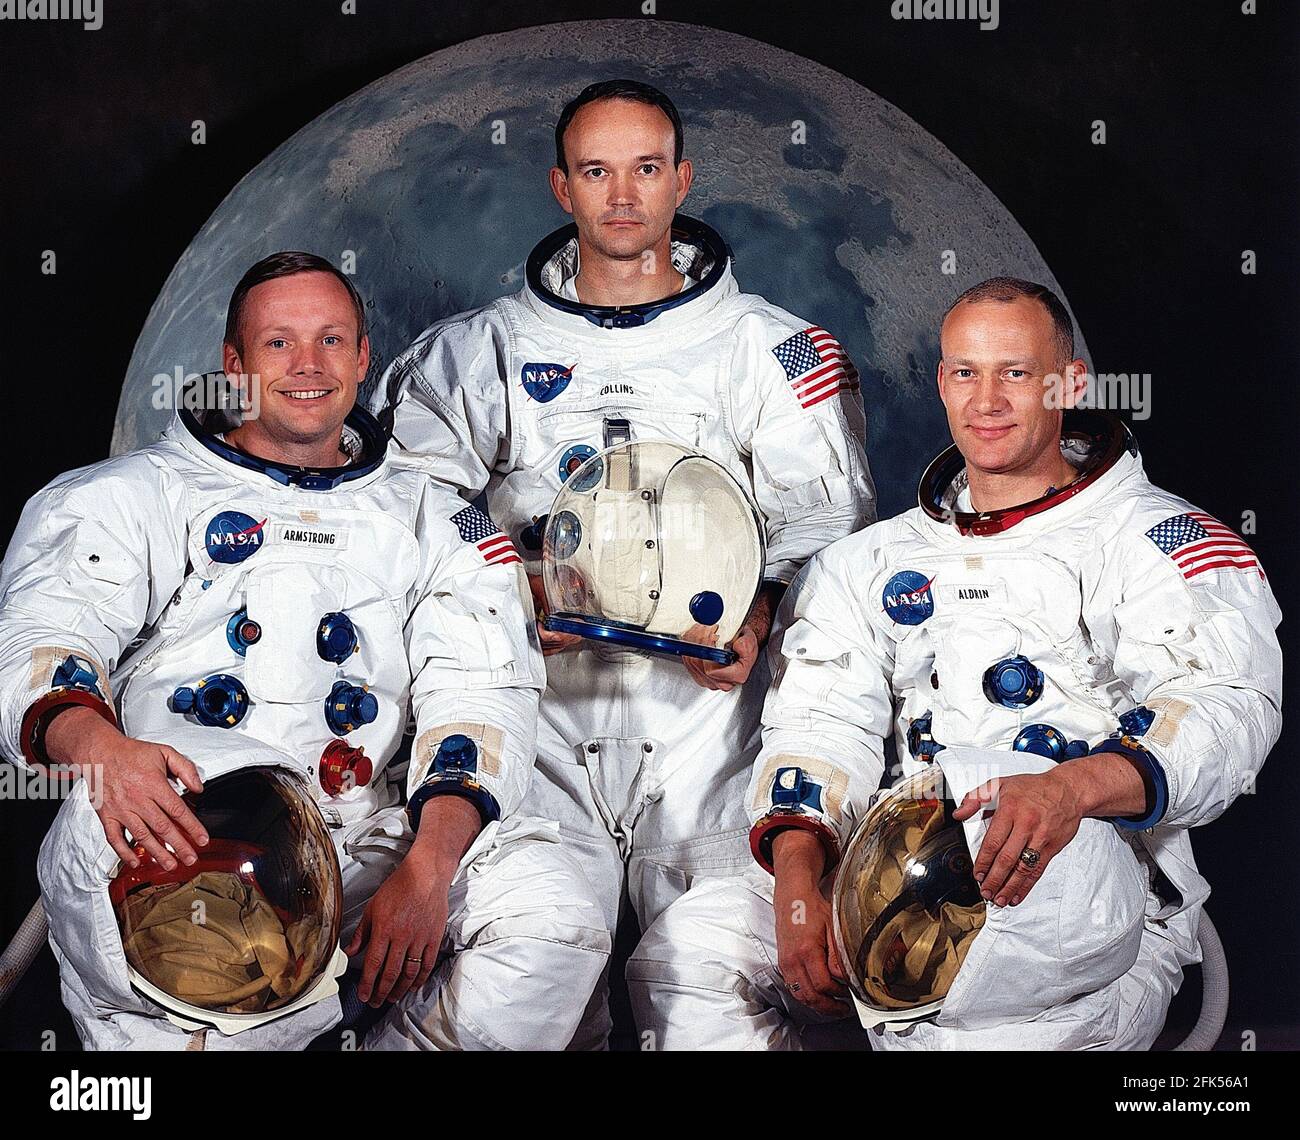 Houston, TX - (FILE) -- Portrait of the prime crew of the Apollo 11 lunar landing mission taken on May 1, 1969. From left to right they are: Commander, Neil A. Armstrong, Command Module Pilot, Michael Collins, and Lunar Module Pilot, Edwin E. Aldrin Jr. On July 20th 1969 at 4:18 PM, EDT the Lunar Module 'Eagle' landed in a region of the Moon called the Mare Tranquillitatis, also known as the Sea of Tranquillity. After securing his spacecraft, Armstrong radioed back to earth: 'Houston, Tranquility Base here, the Eagle has landed'. At 10:56 p.m. that same evening and witnessed by a worldwide tel Stock Photo